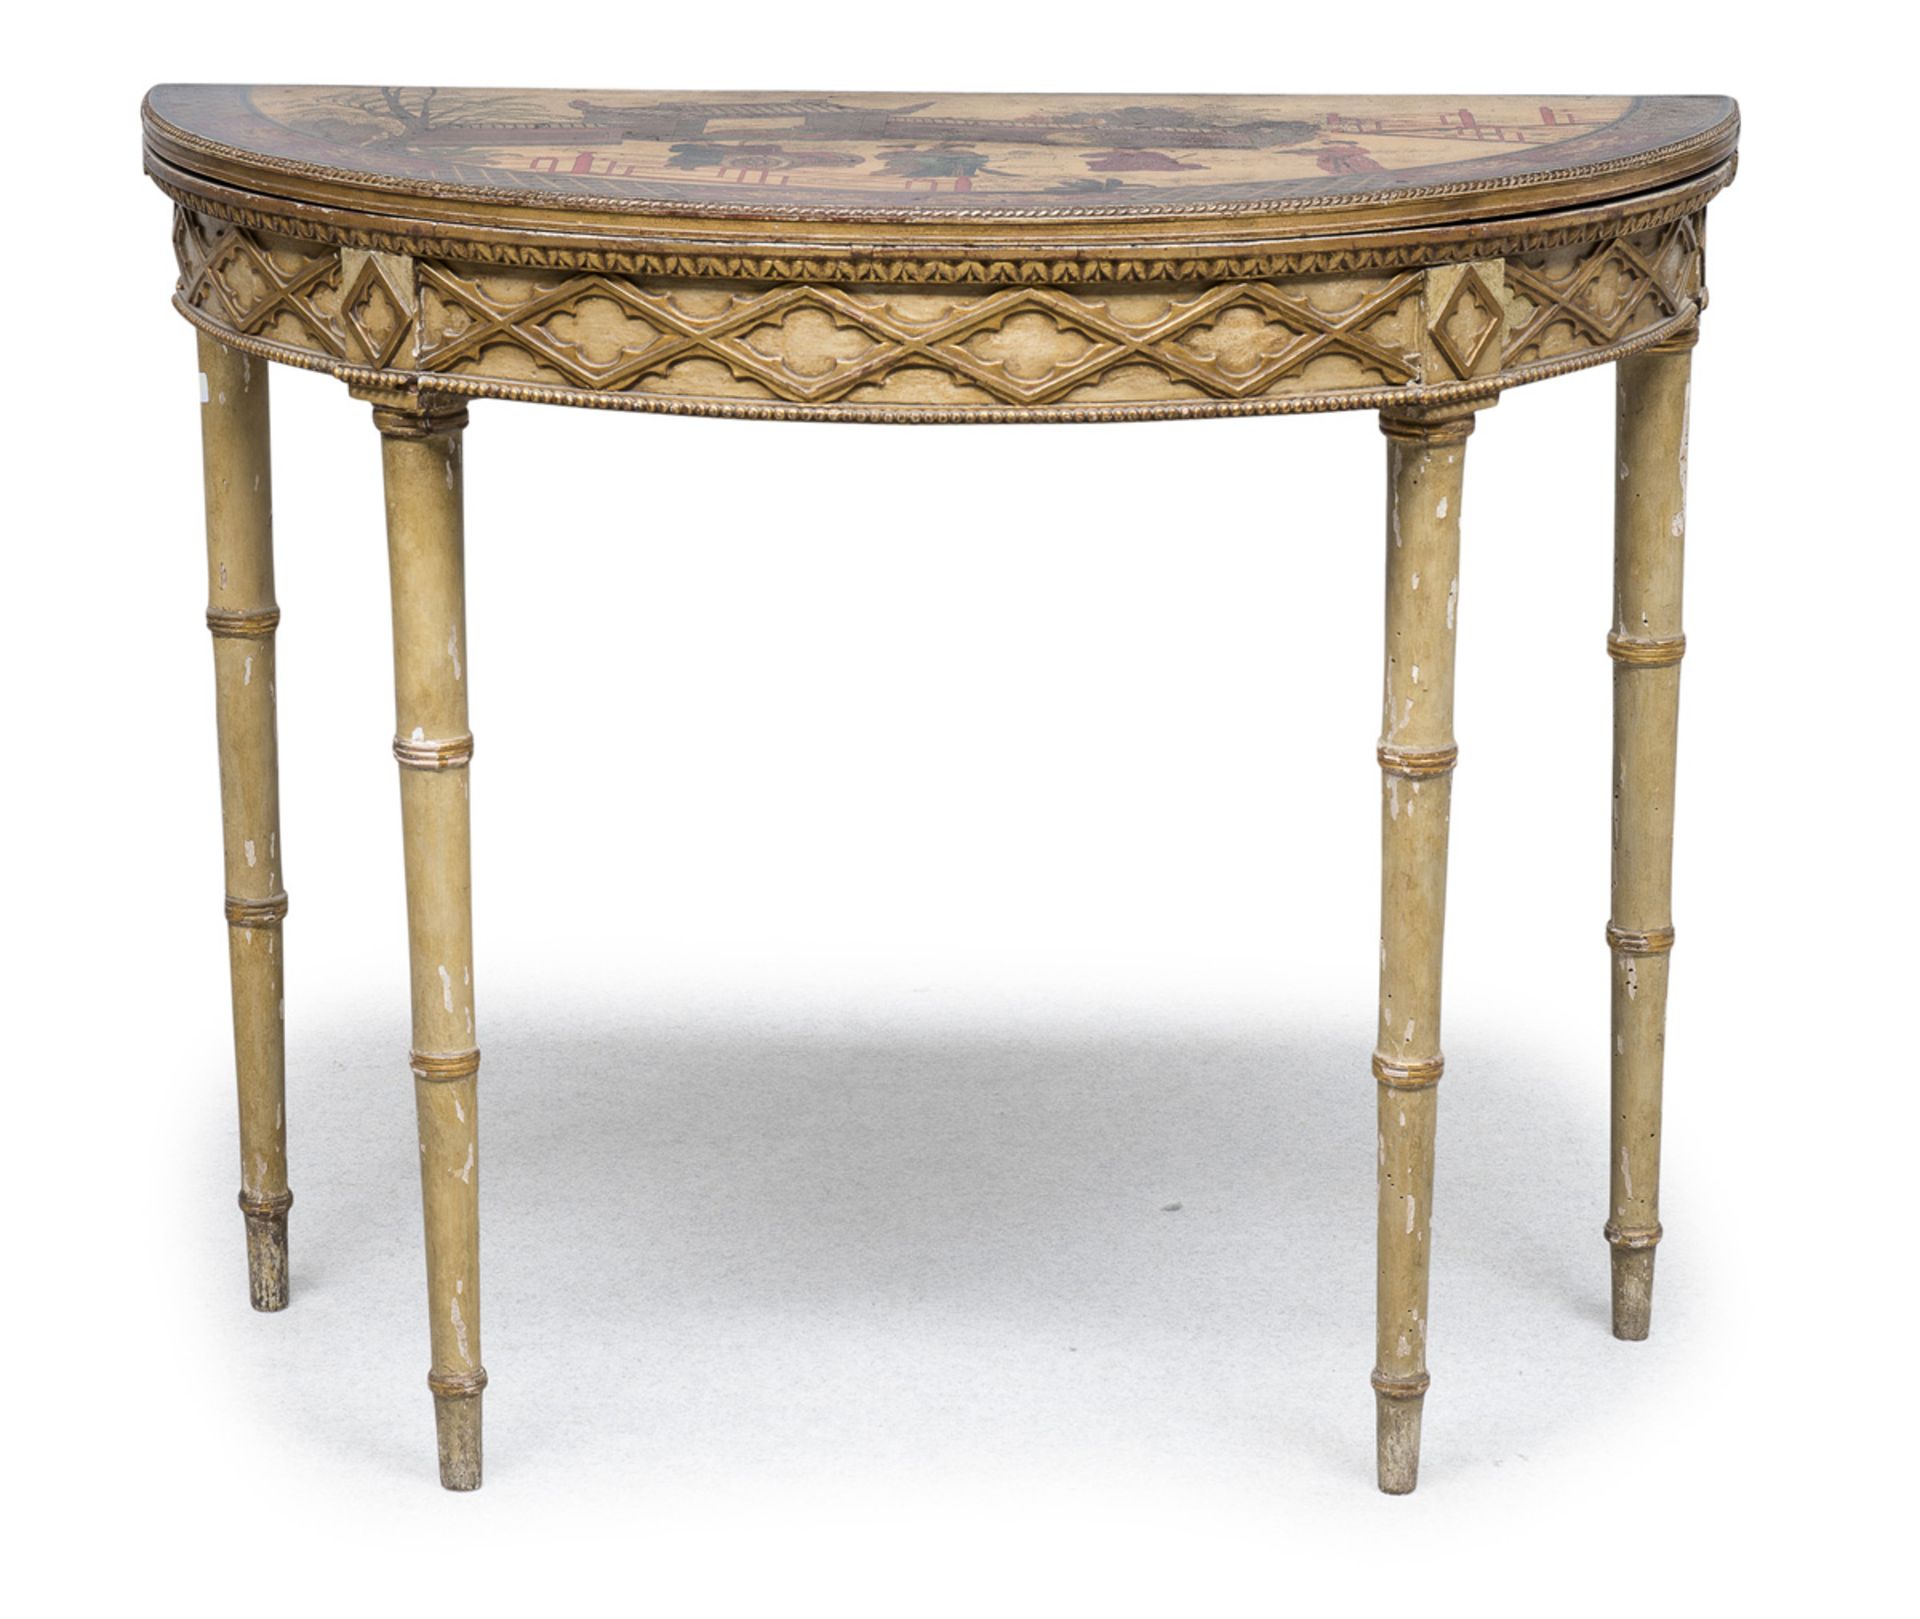 GAME TABLE PIEDMONT OR FRANCE END OF THE PERIOD LOUIS XVI